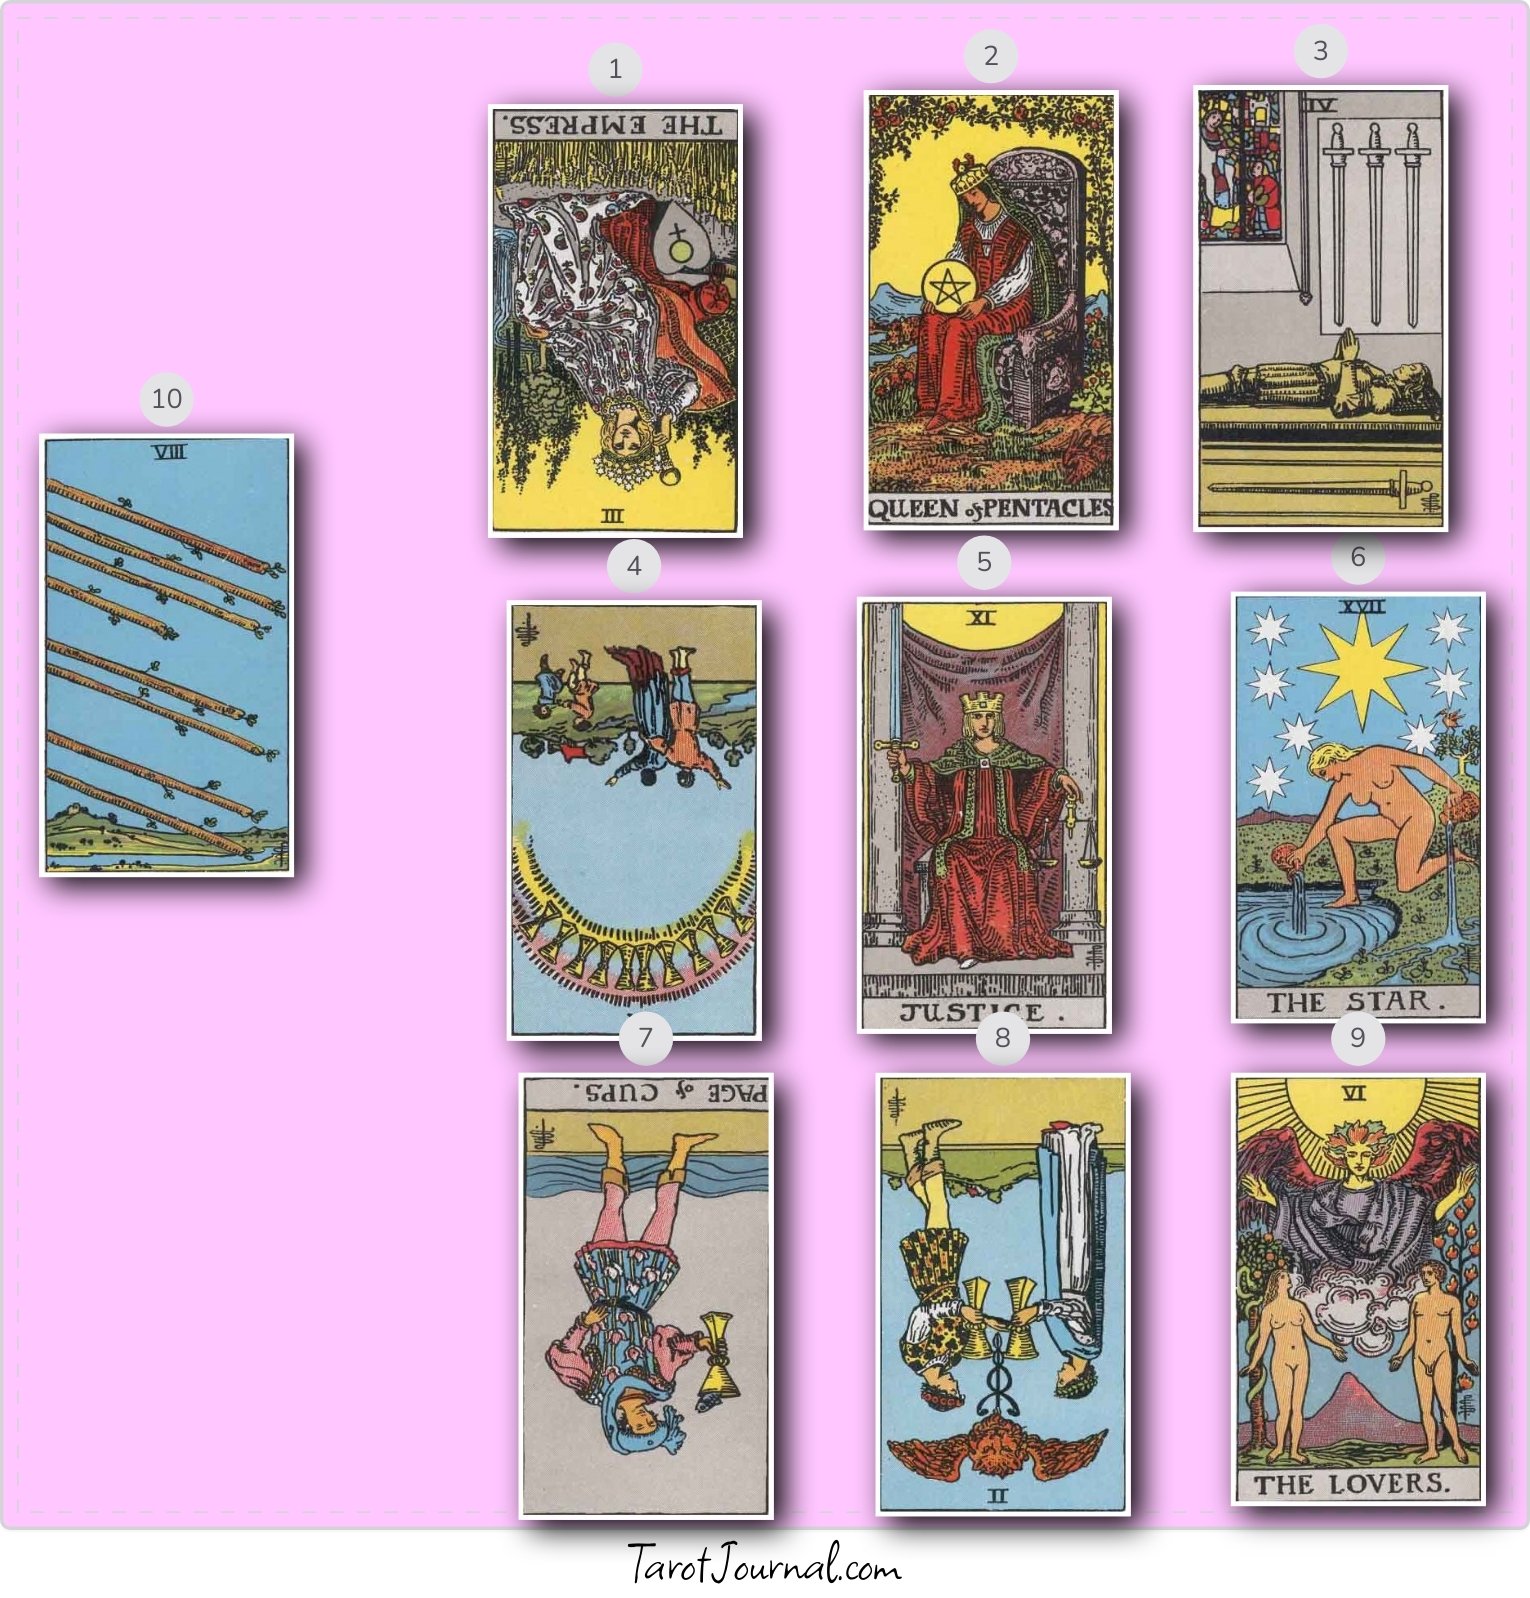 My relationship in view - tarot reading by Tiffany